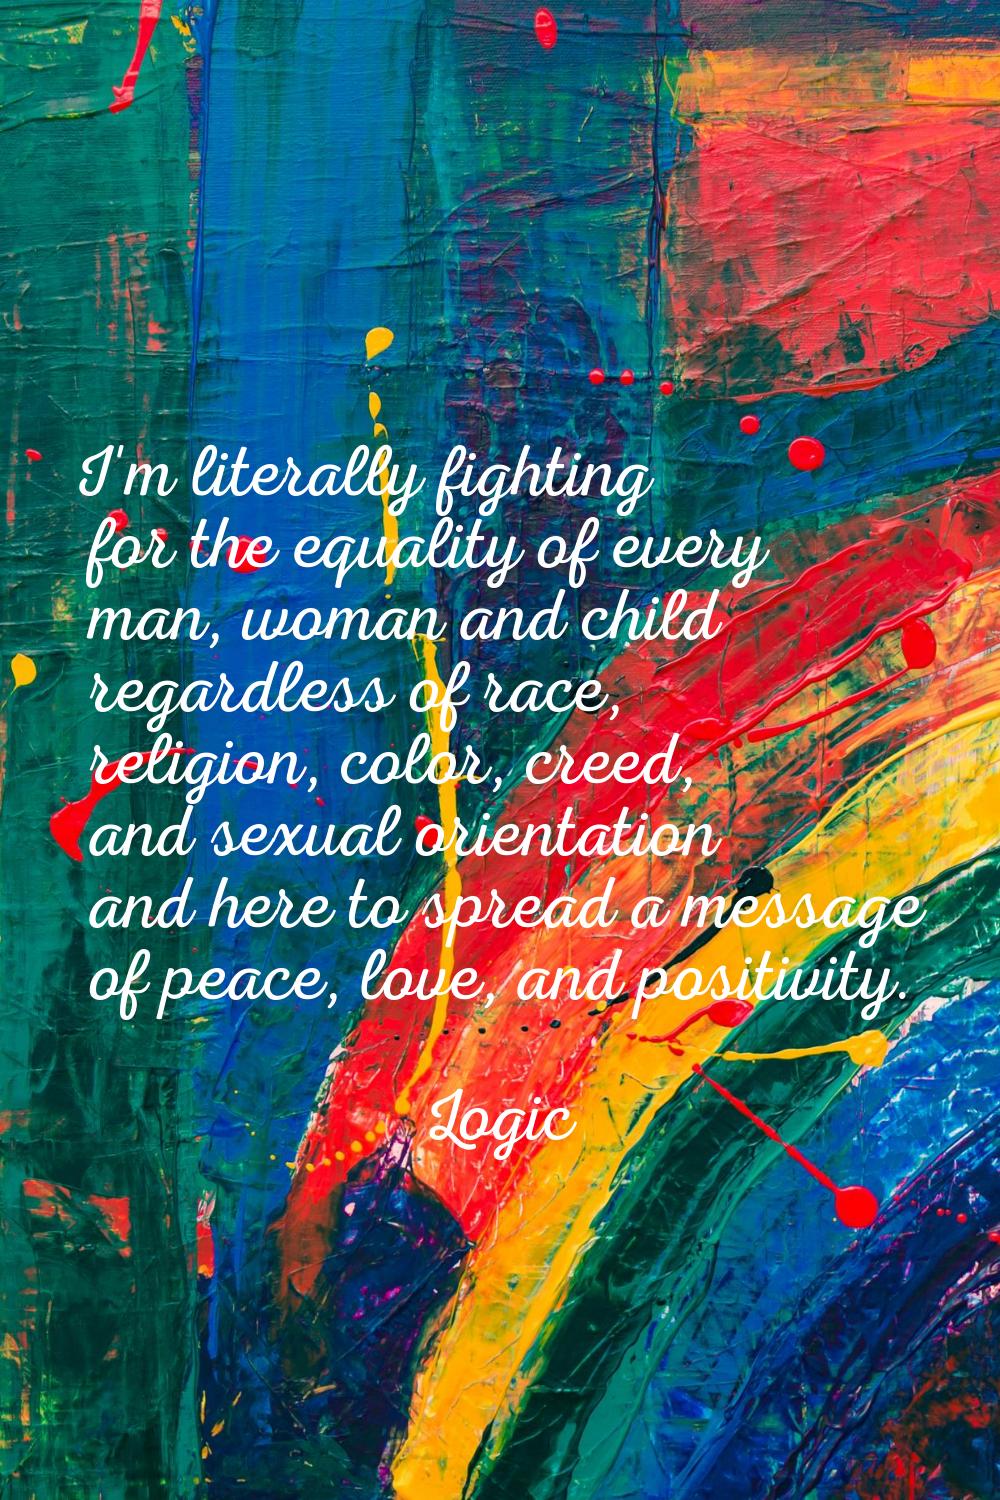 I'm literally fighting for the equality of every man, woman and child regardless of race, religion,